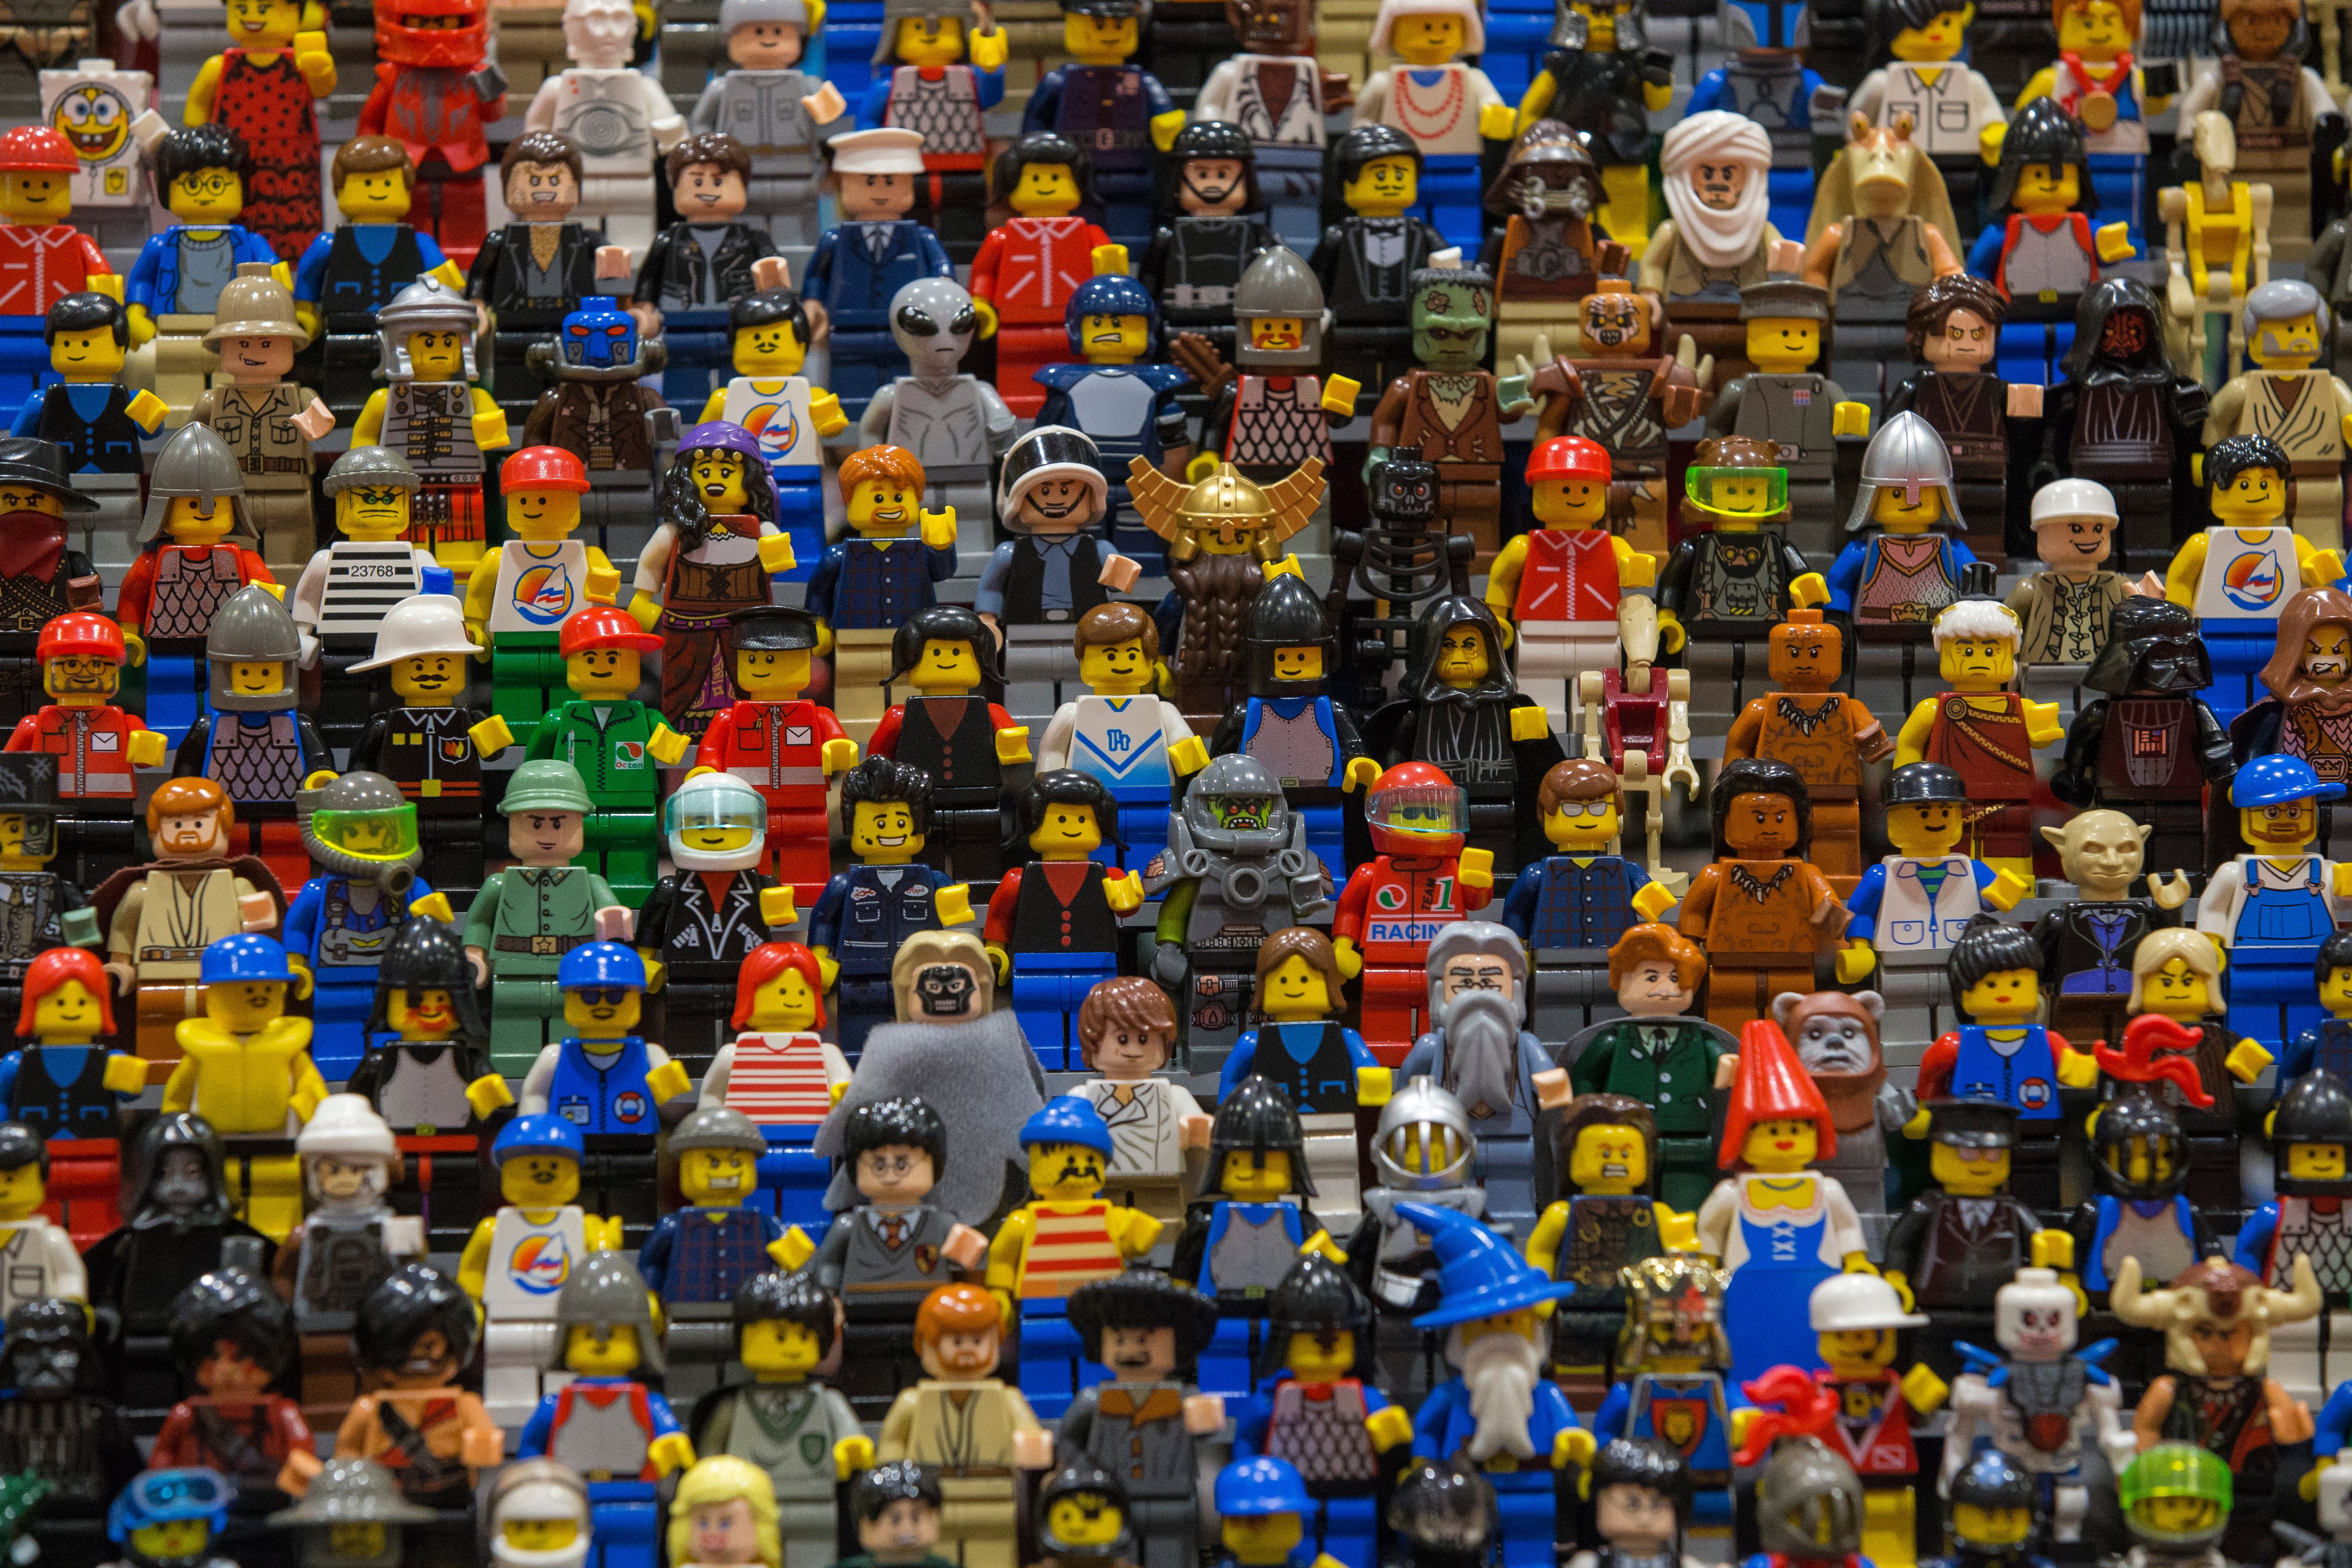 Lego figures are displayed on the opening day of BRICK 2014 at the Excel Centre on November 27, 2014 in London. (Dan Kitwood—Getty Images)